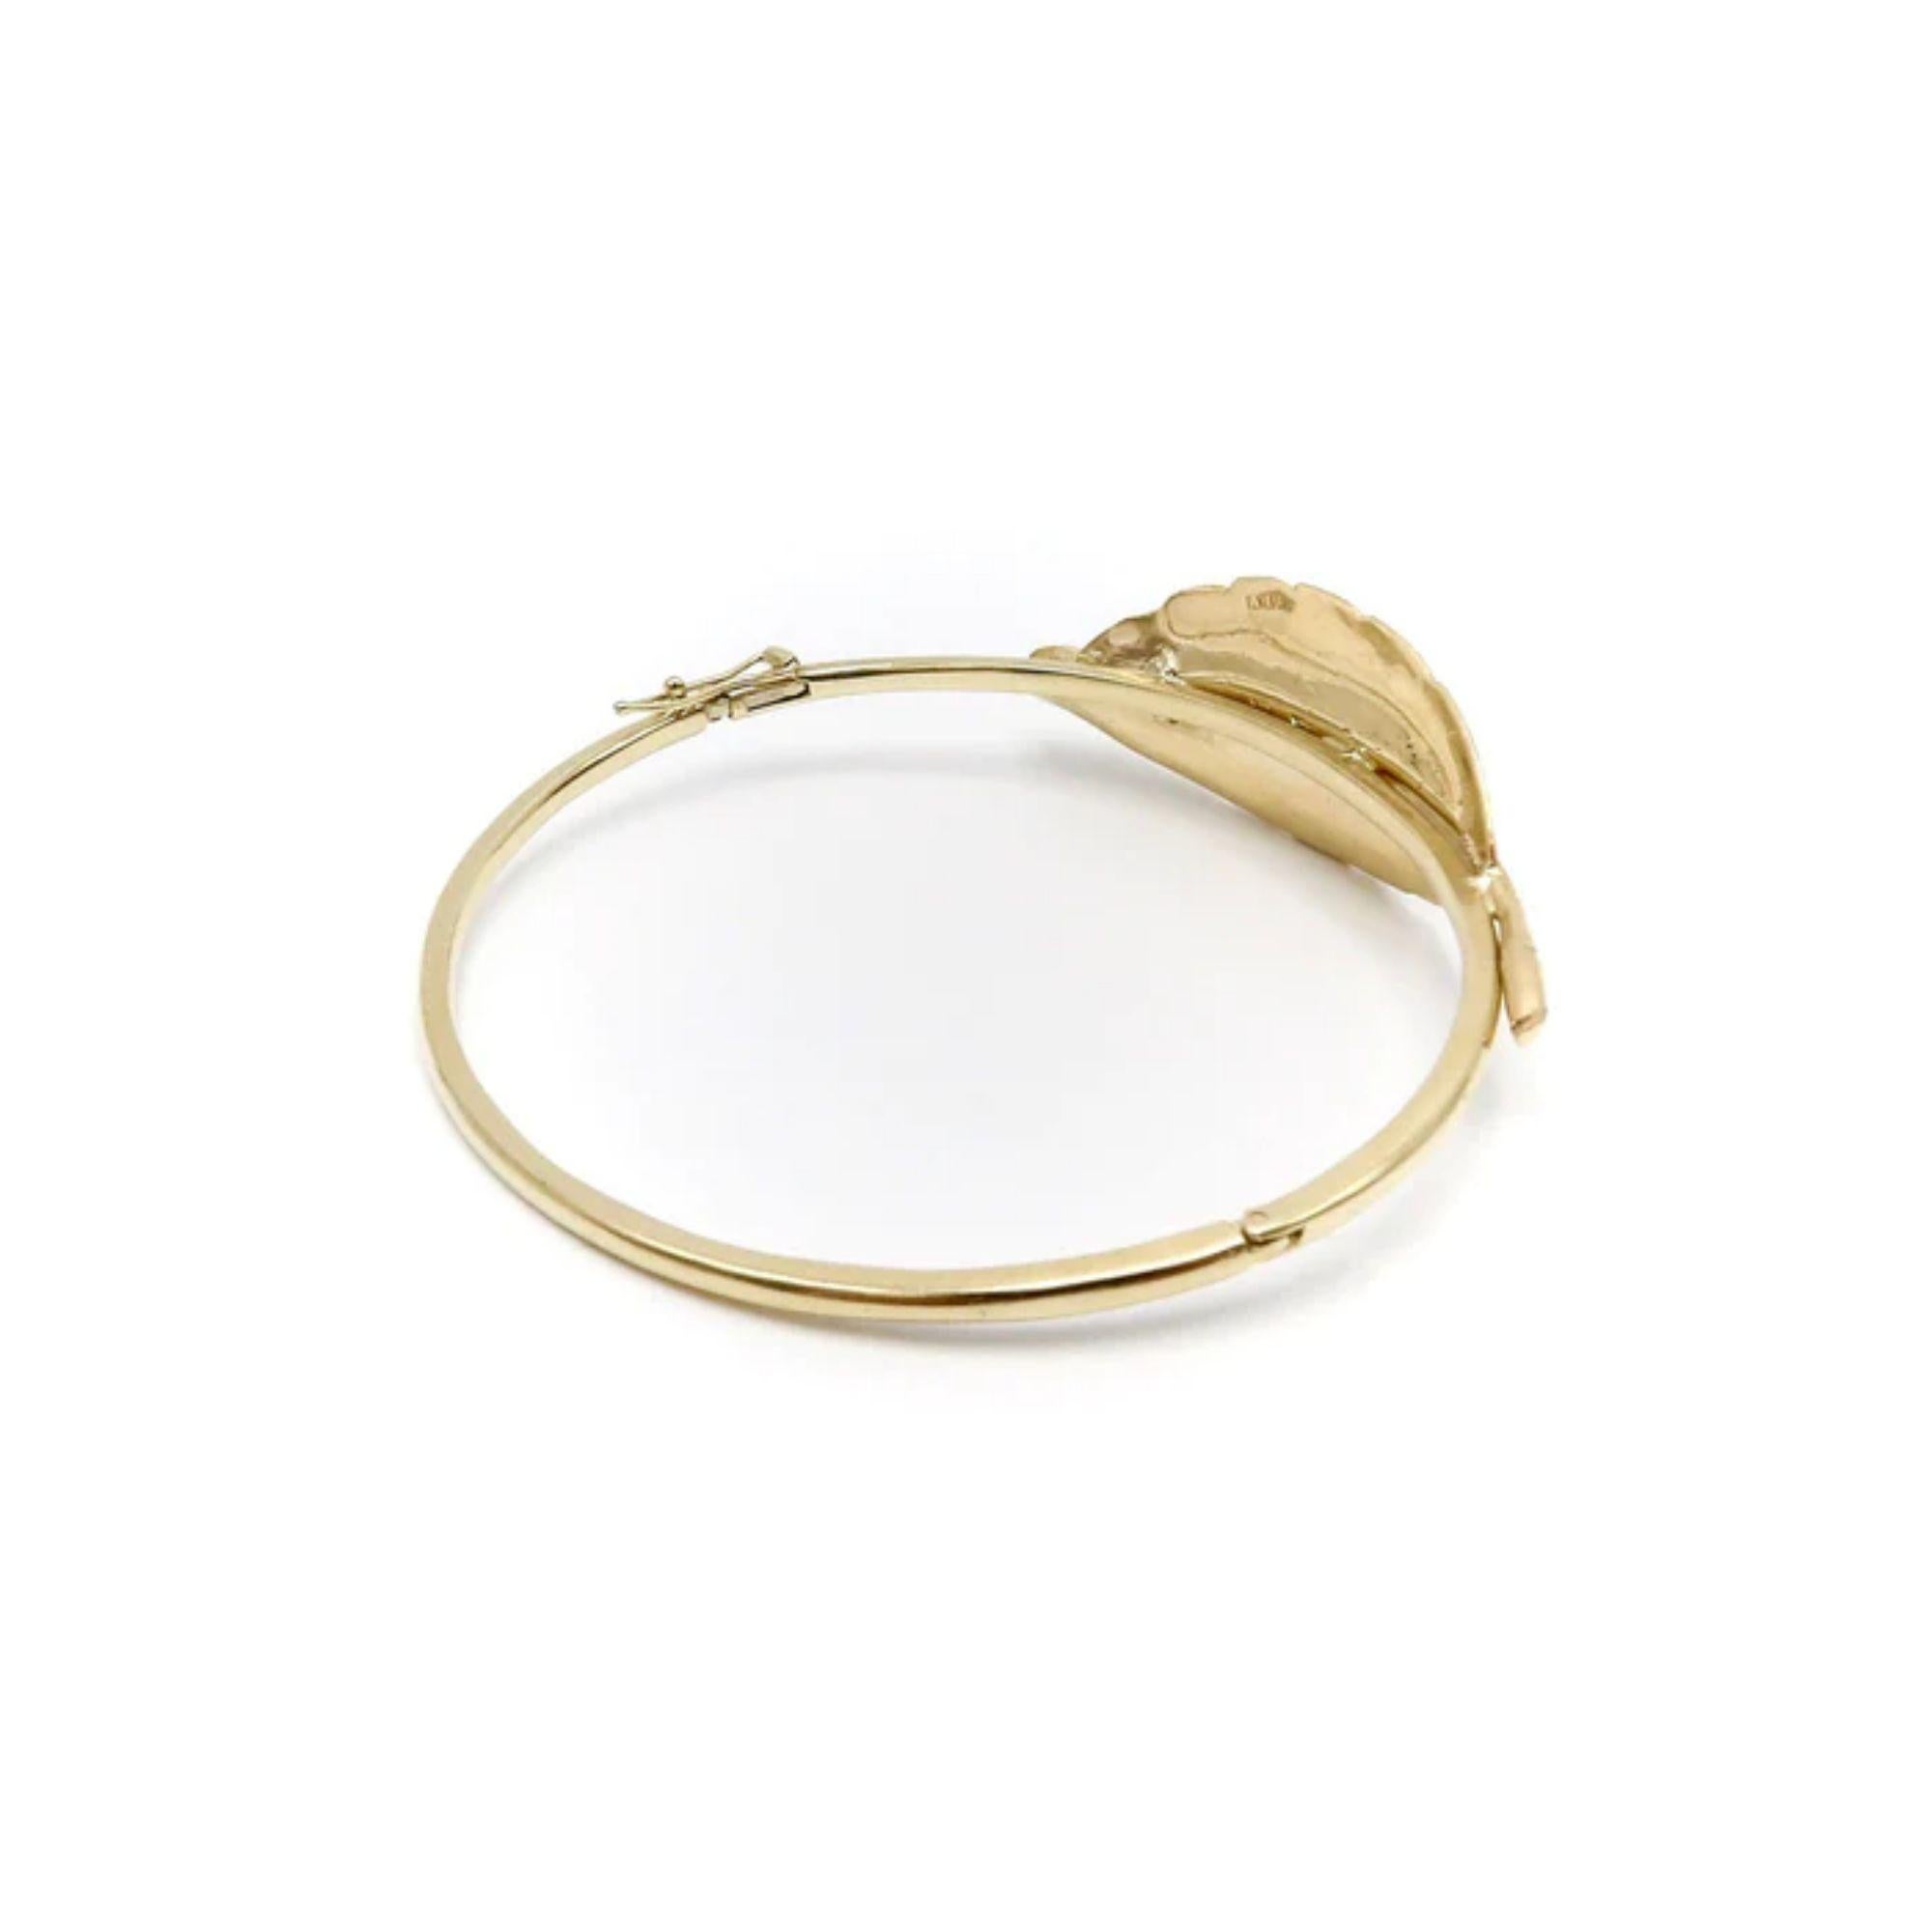 14K Gold Retro Leaf Bangle Bracelet with Florentine Finish In Excellent Condition For Sale In Venice, CA